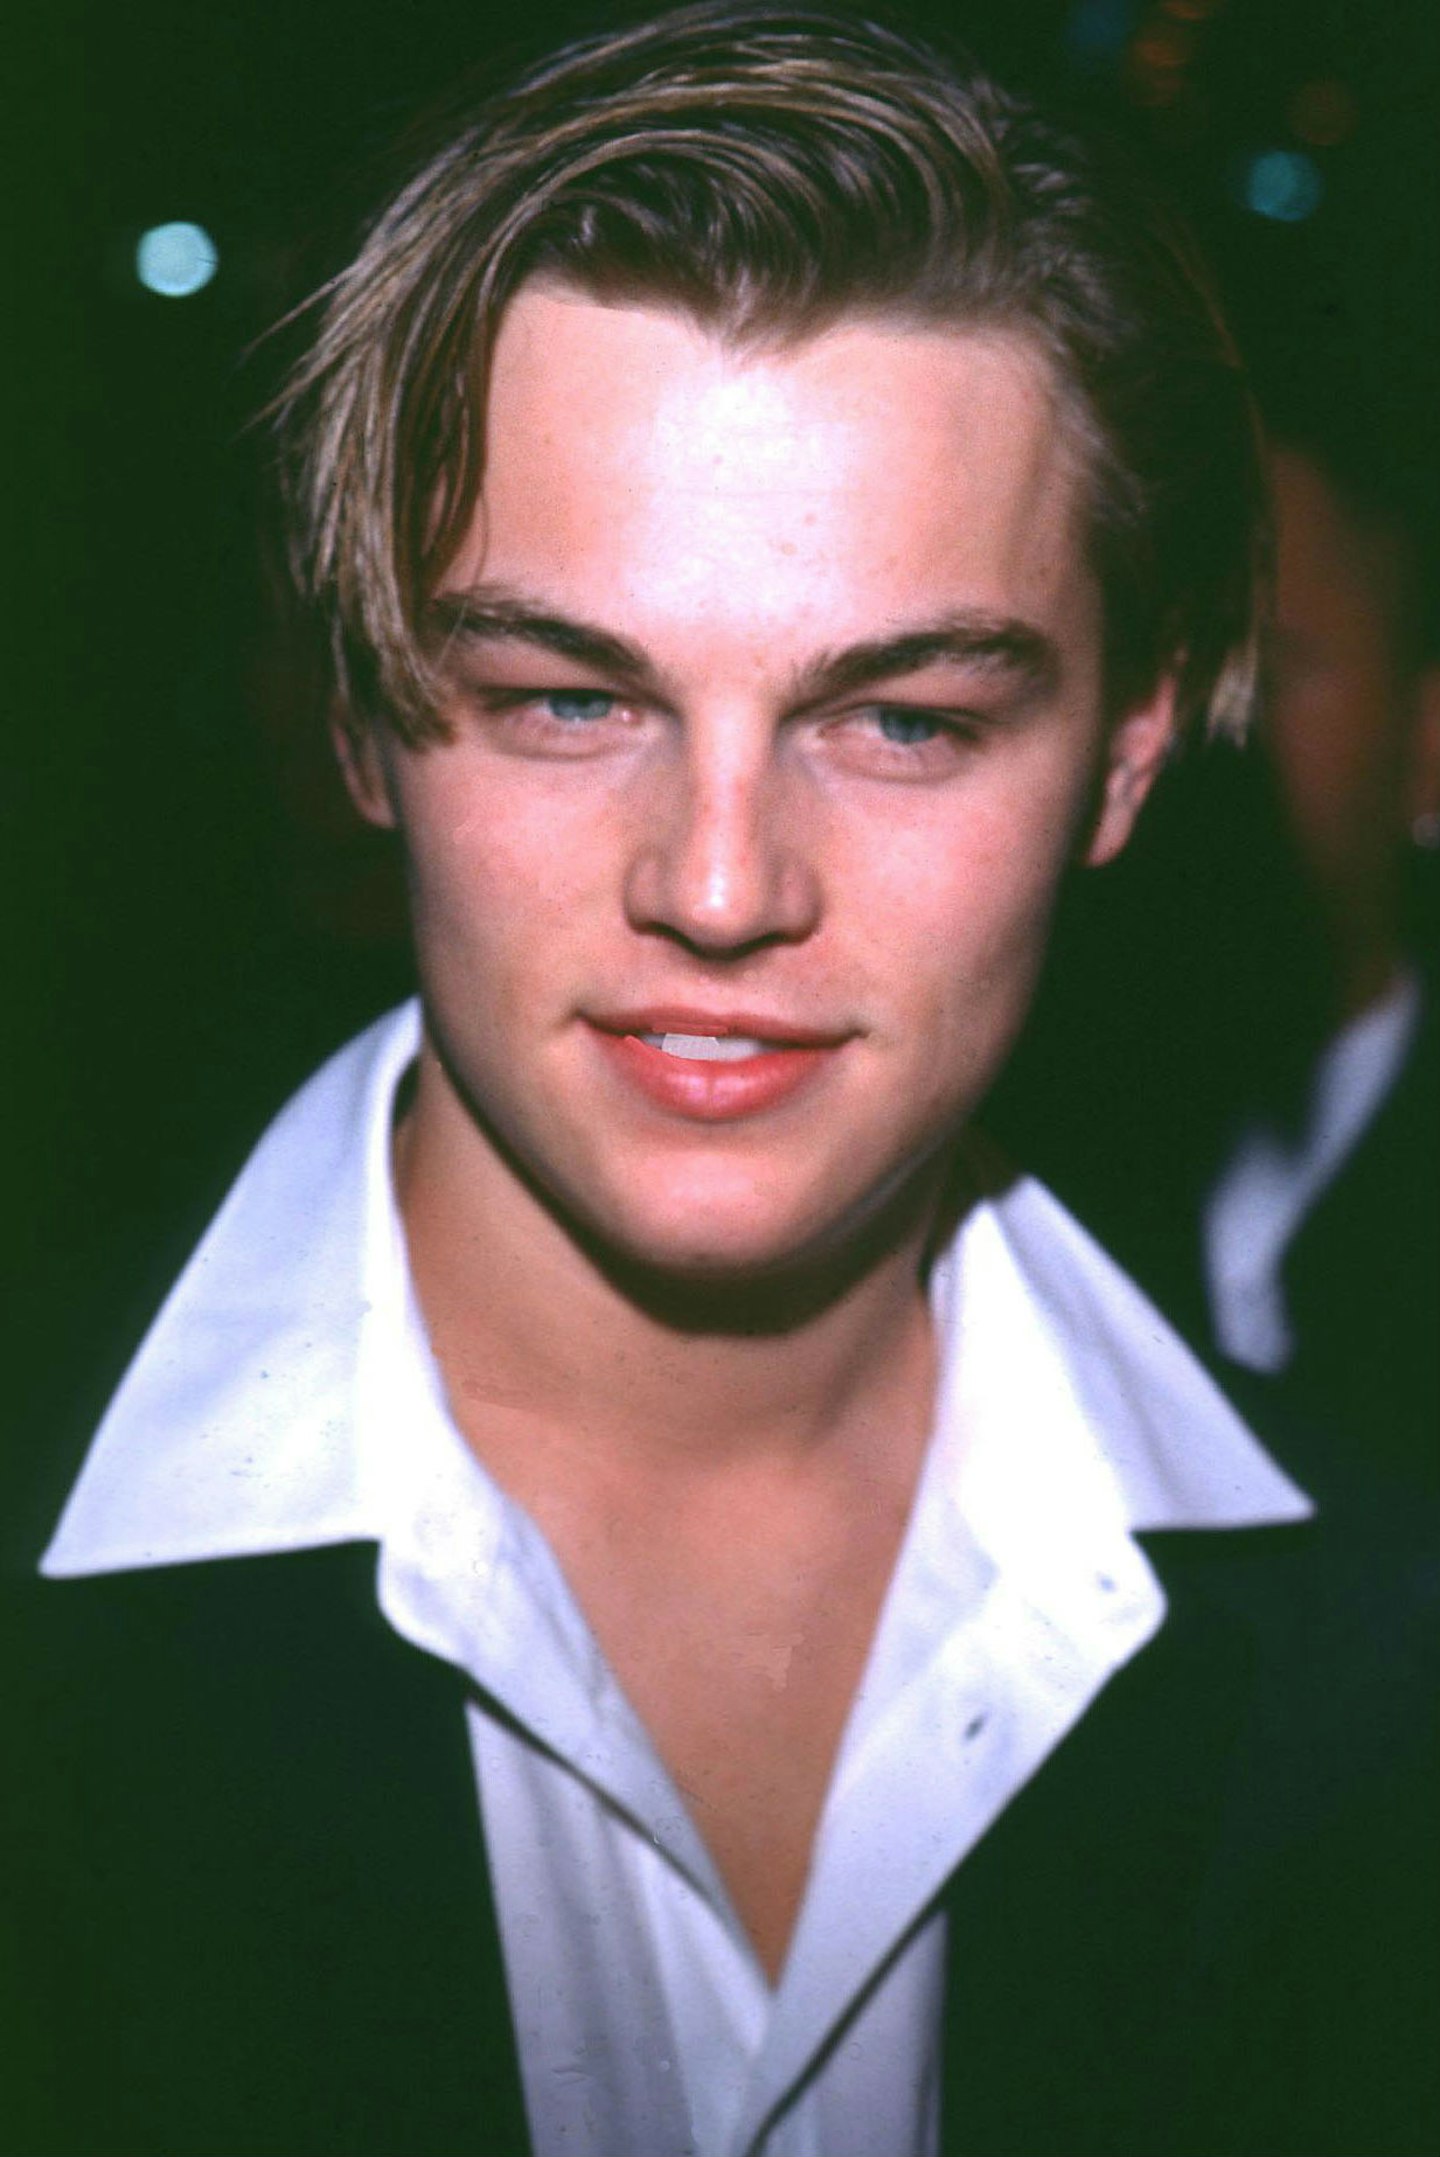 The real Leo in 1996